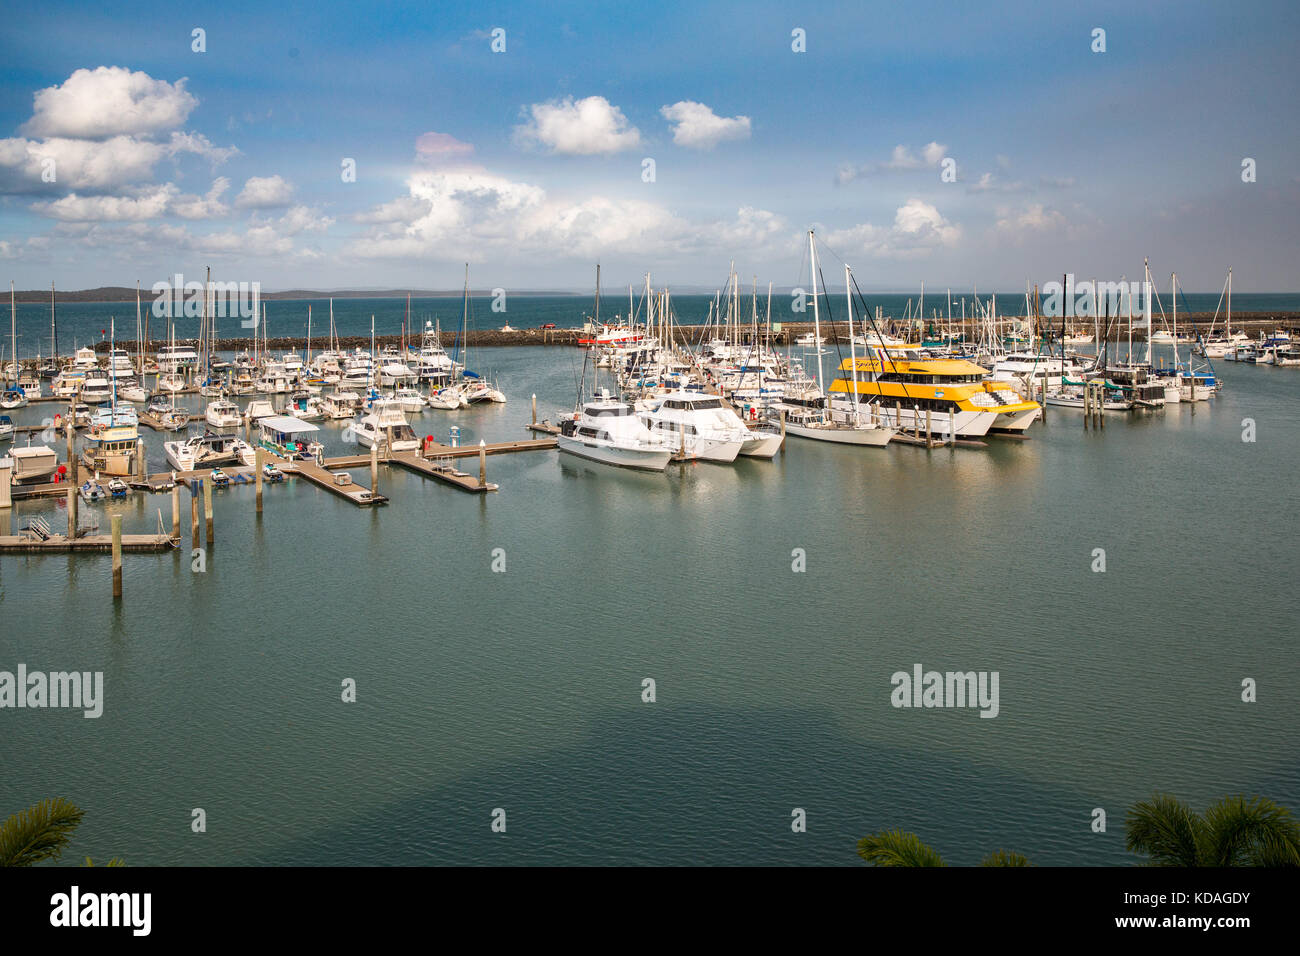 Luxury boats including some used for whale watching tourism moored at the  Hervey Bay Marina, Queensland, Australia Stock Photo